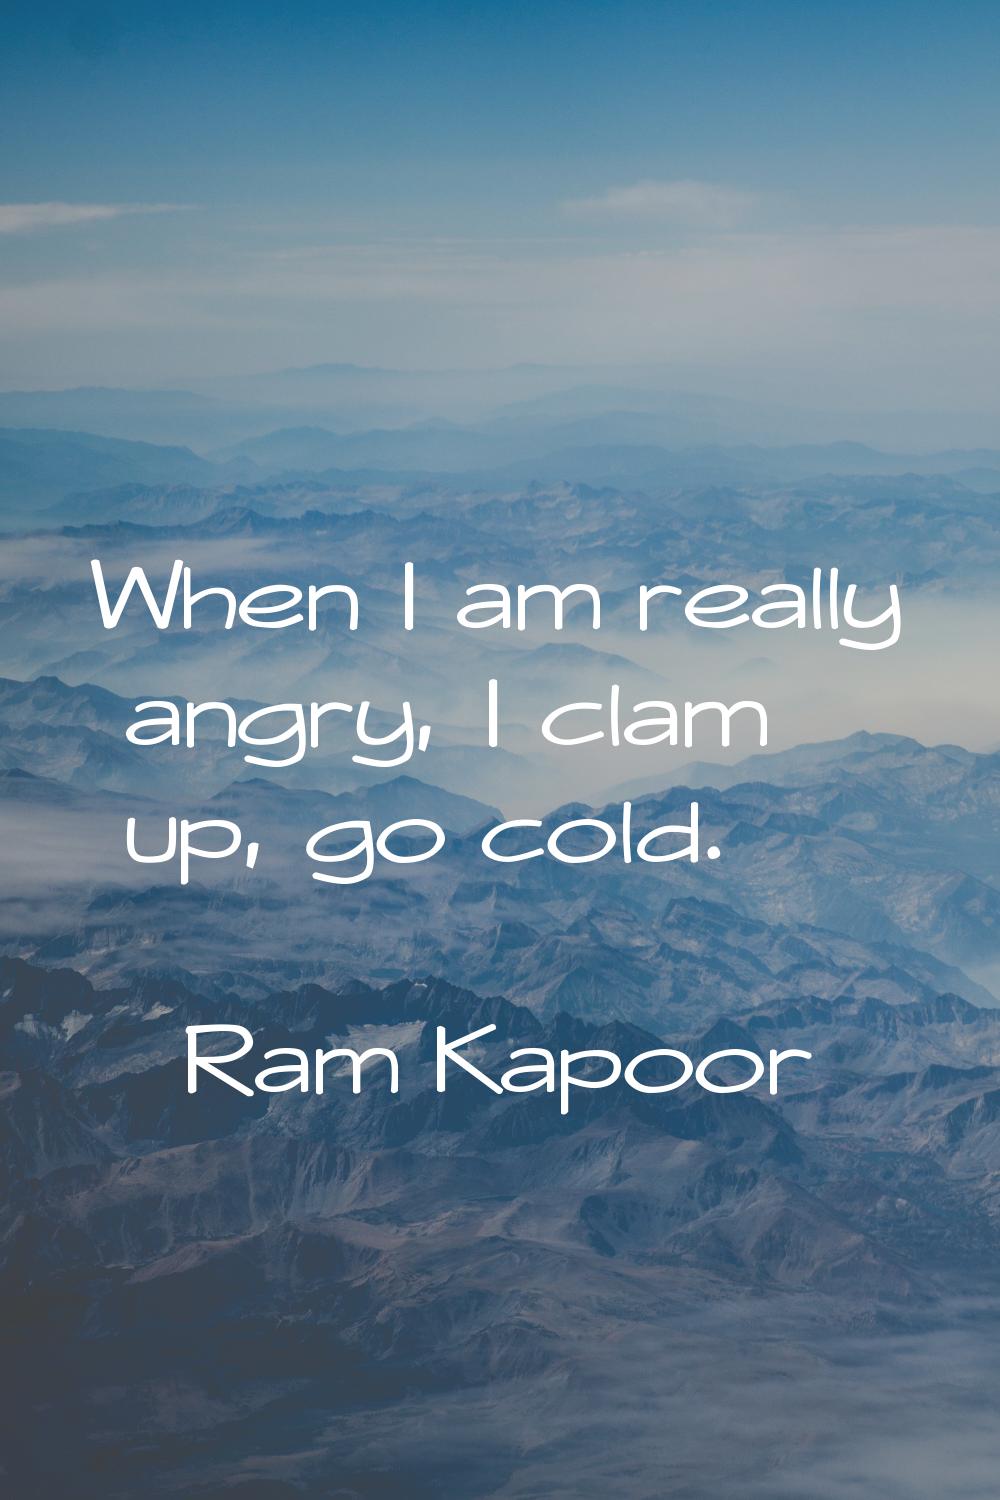 When I am really angry, I clam up, go cold.